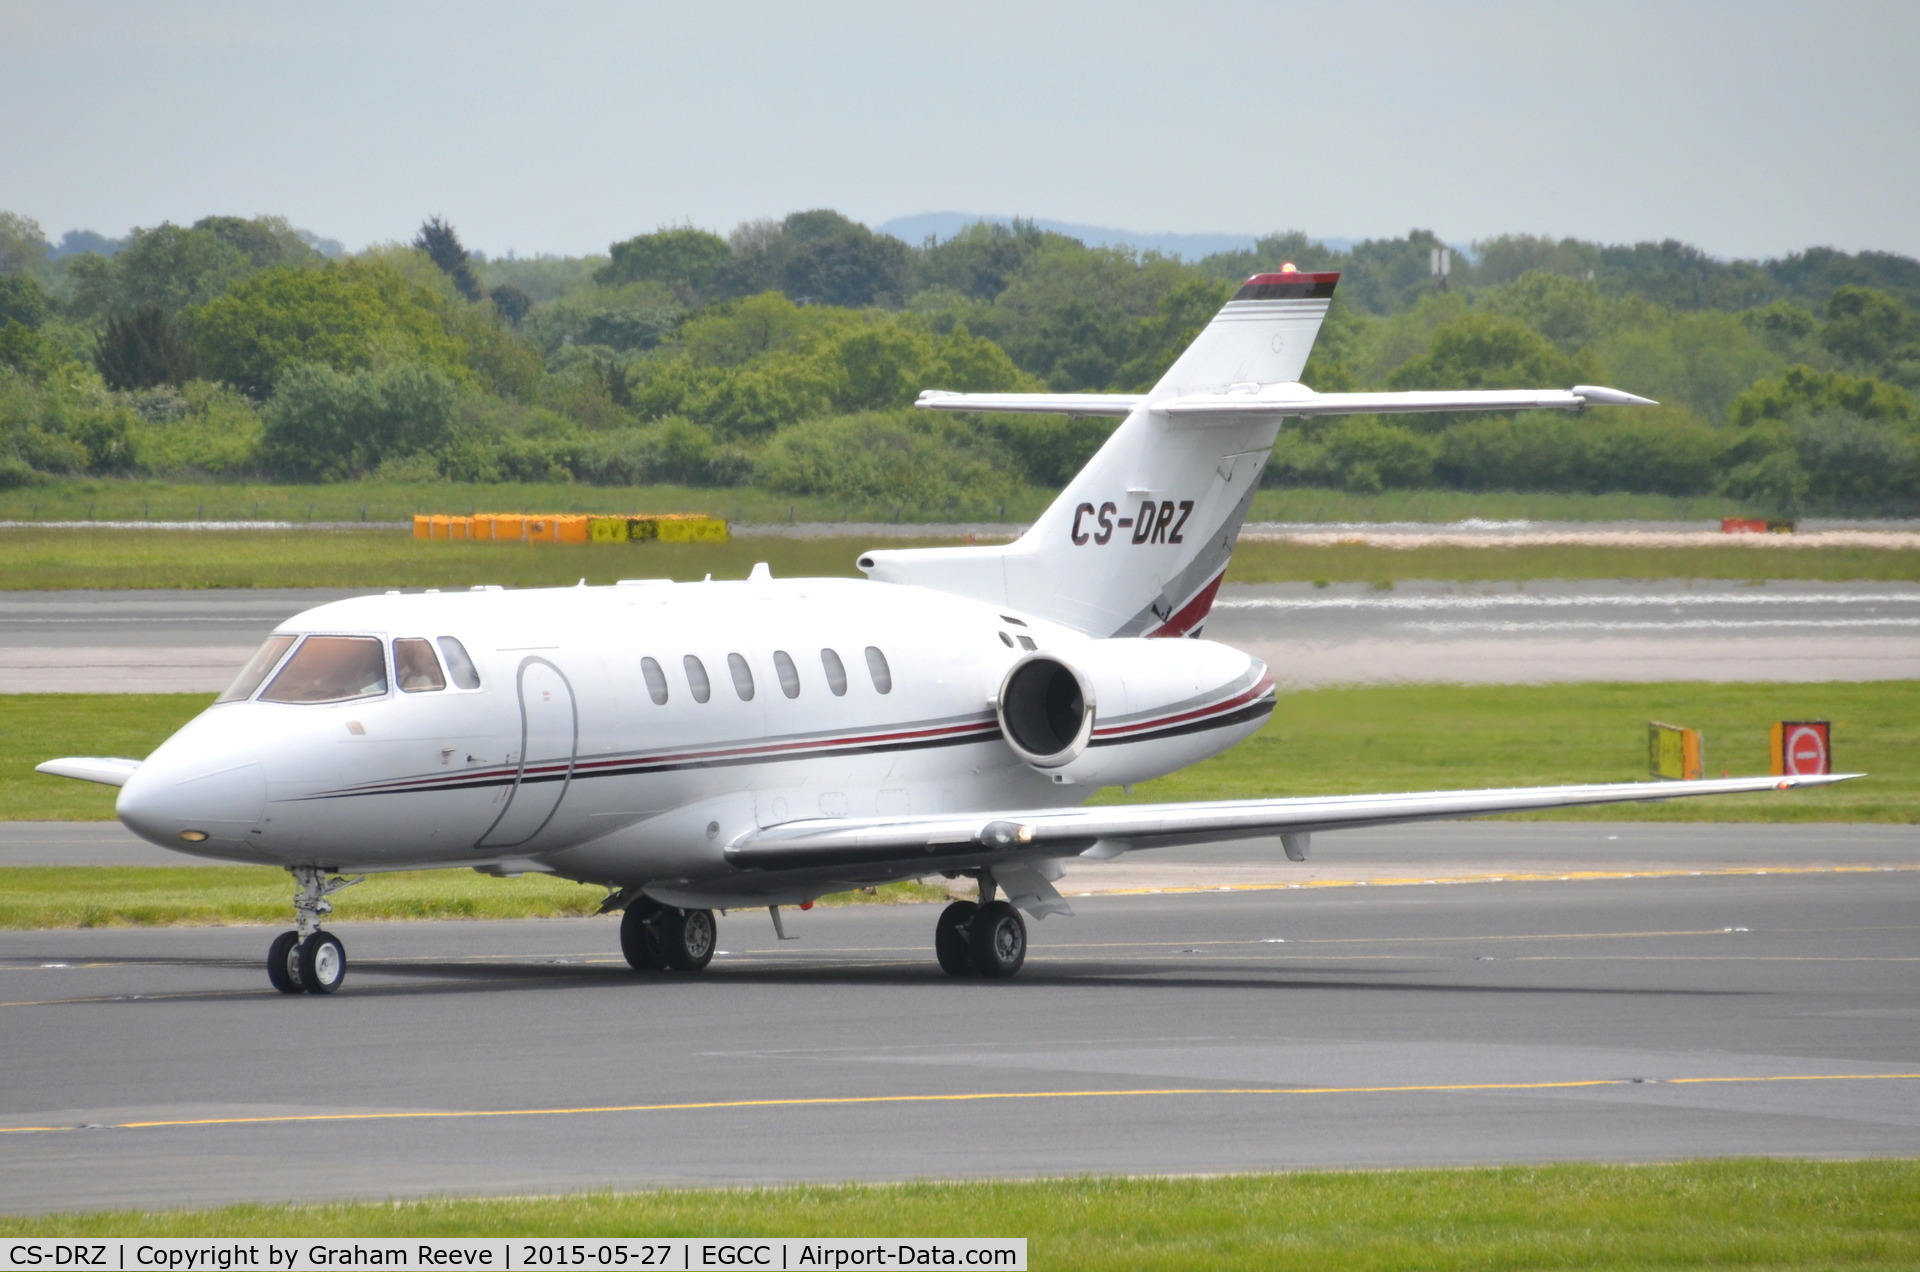 CS-DRZ, 2007 Hawker Beechcraft 800XPi C/N 258847, Just landed at Manchester.